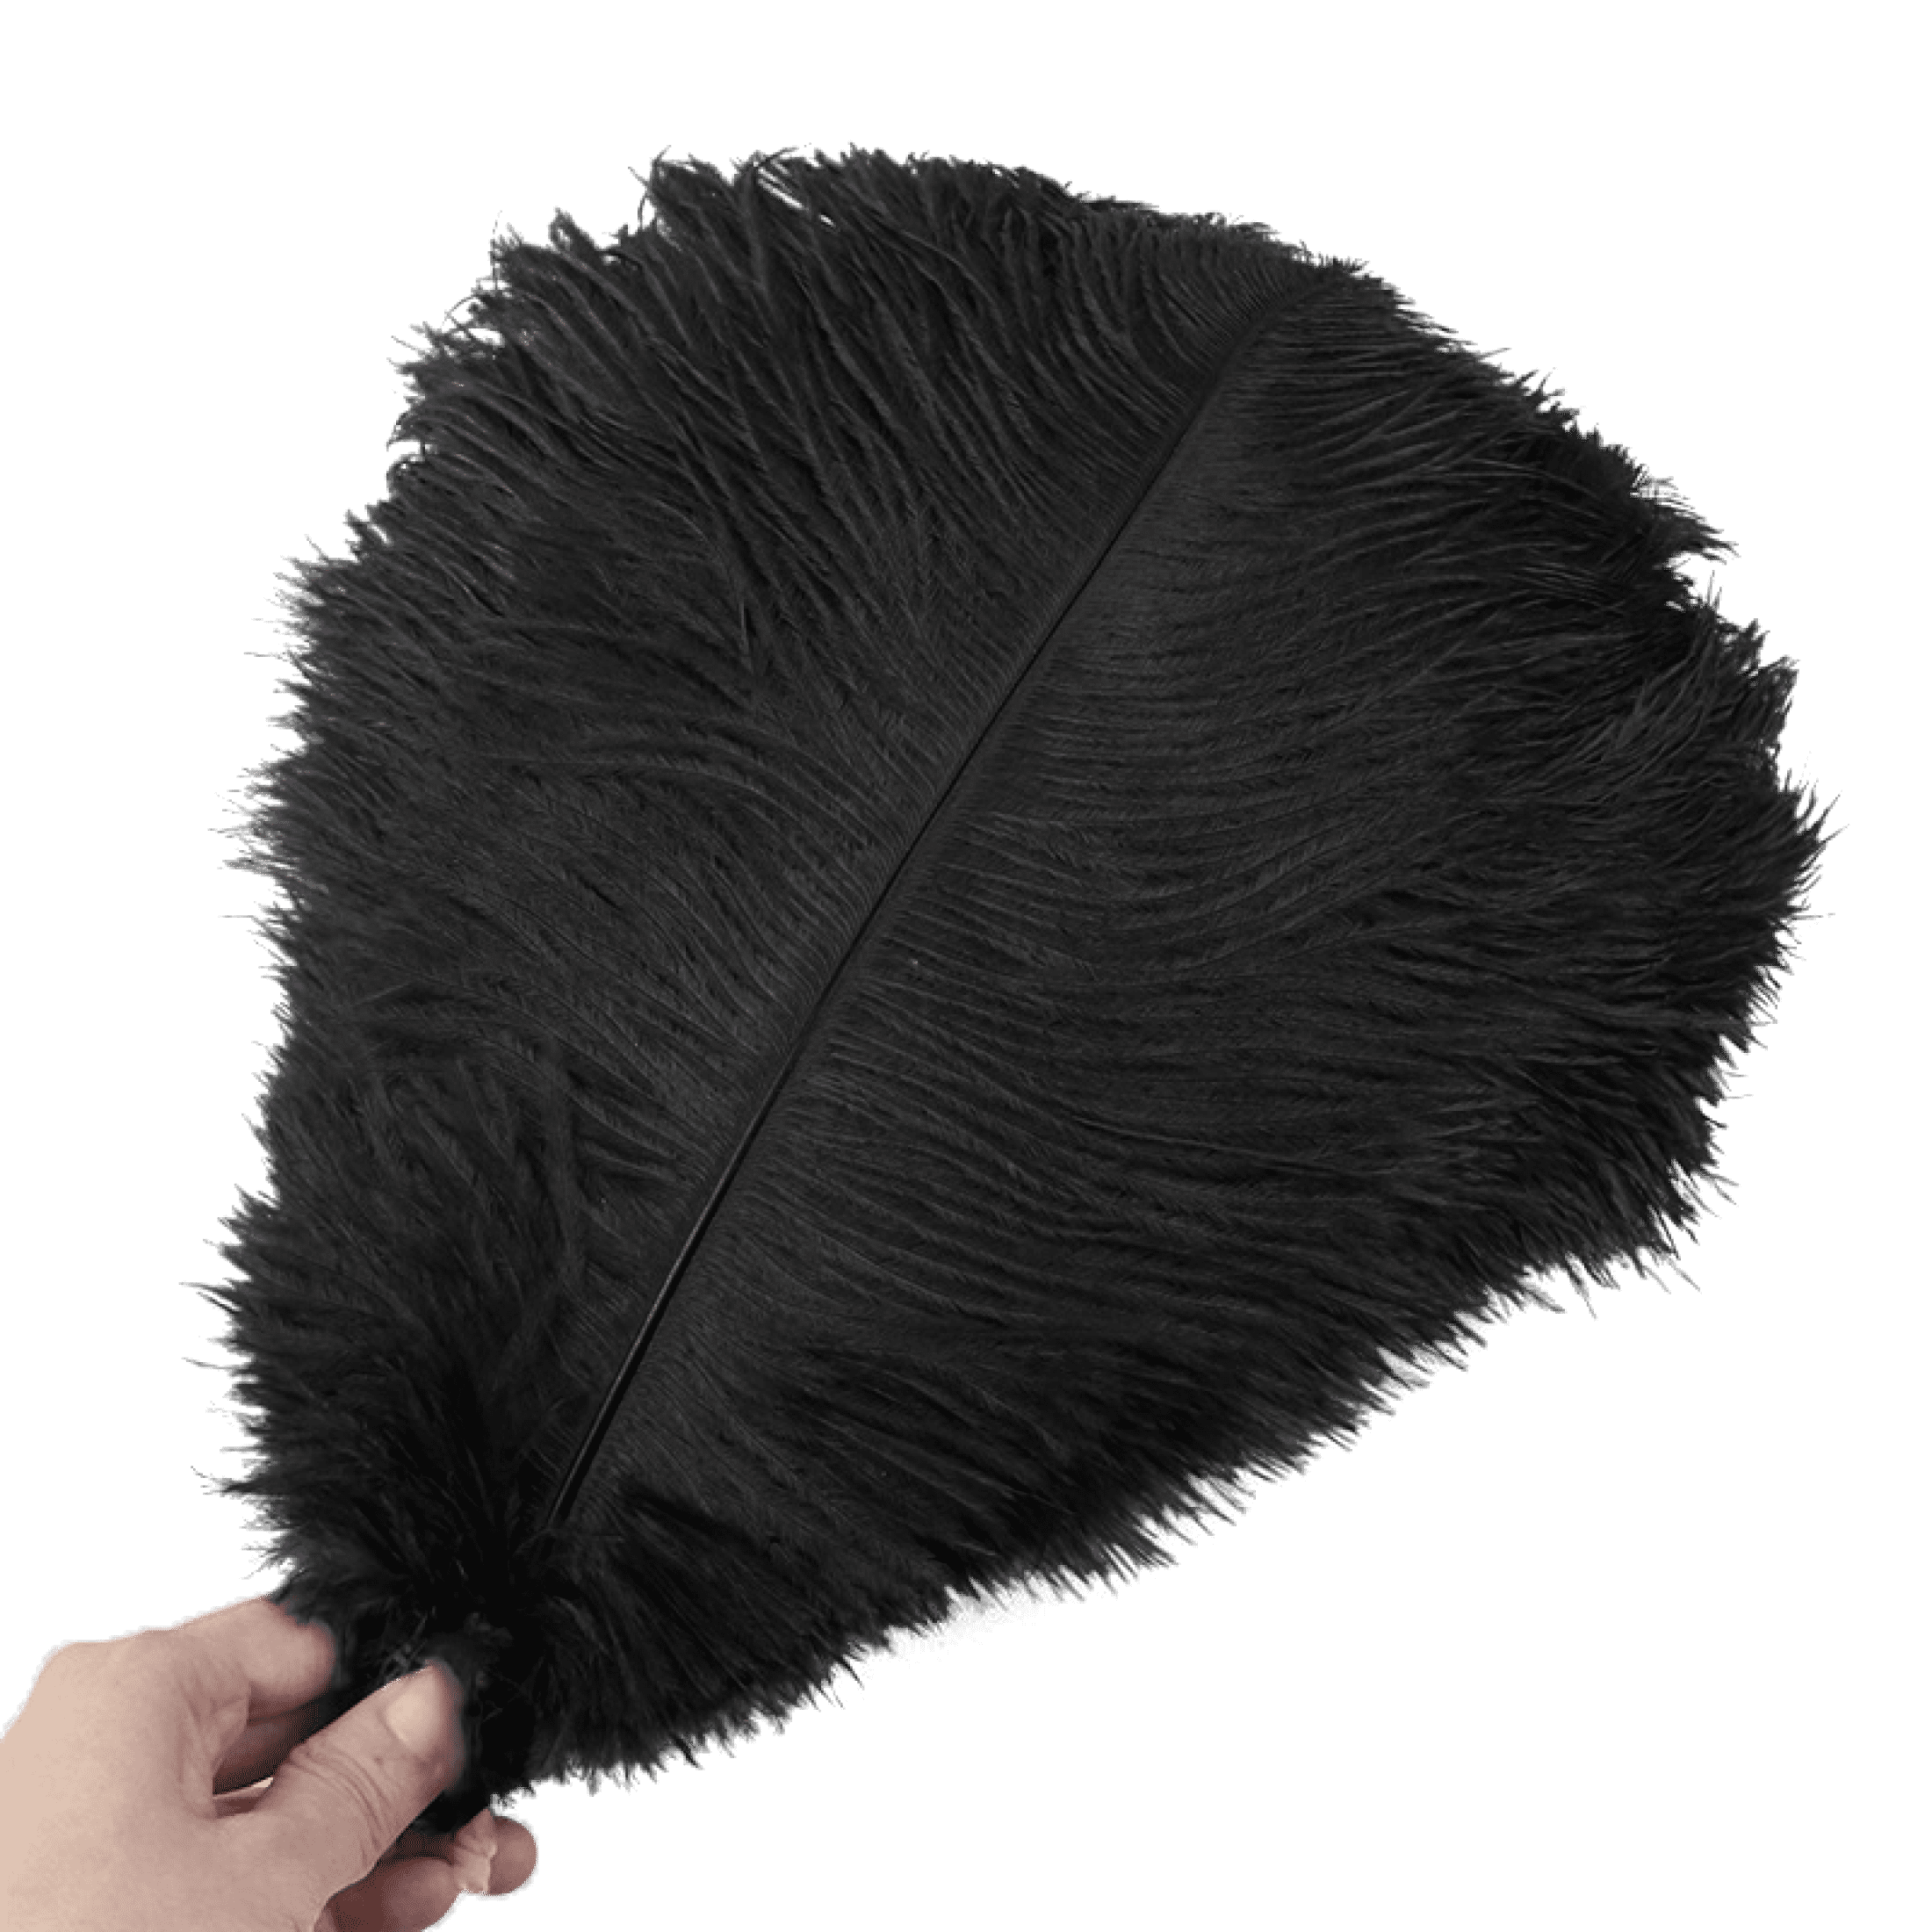 EUBUY 10Pcs Colorful Natural Ostrich Feathers Party Carnaval Wedding  Accessories for Jewelry Making Plume Crafts Vase DIY Dream Catcher  Decorations Black 